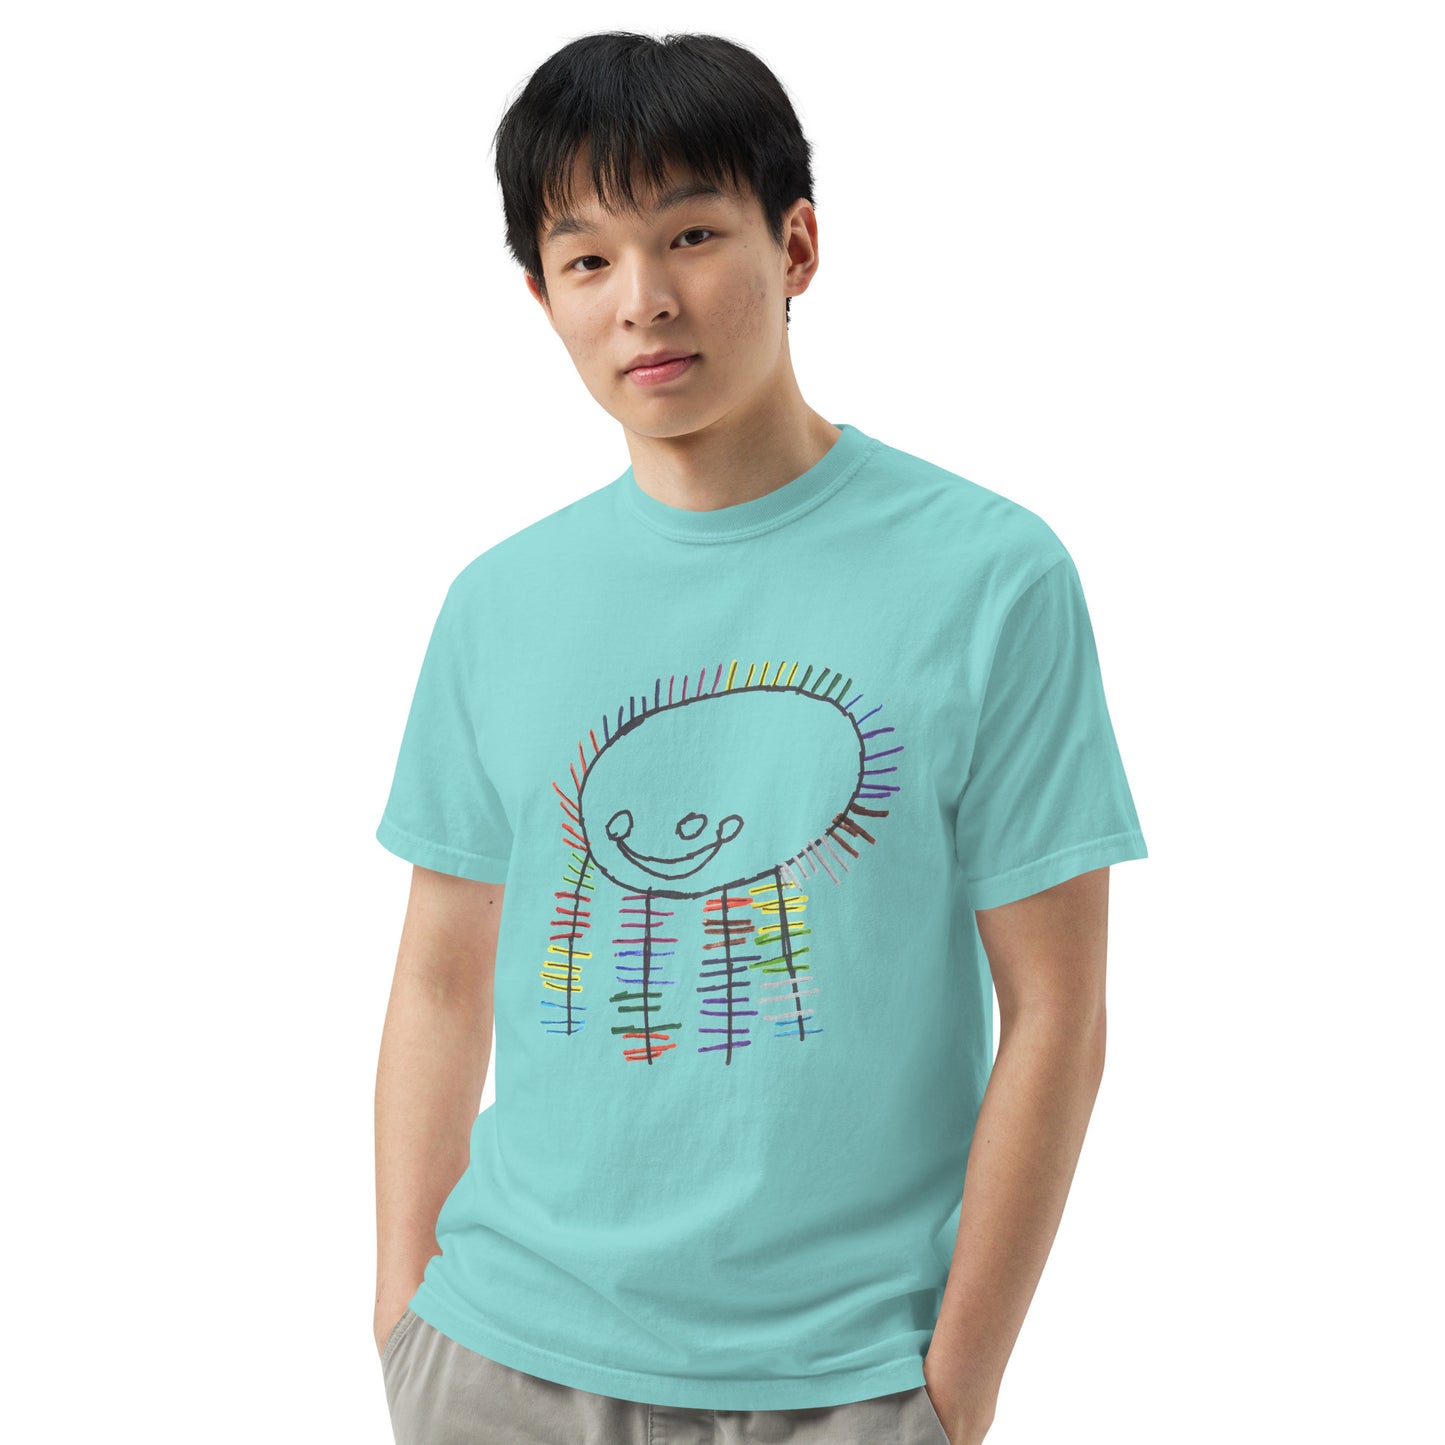 Men's tee - "Me and My Markers"